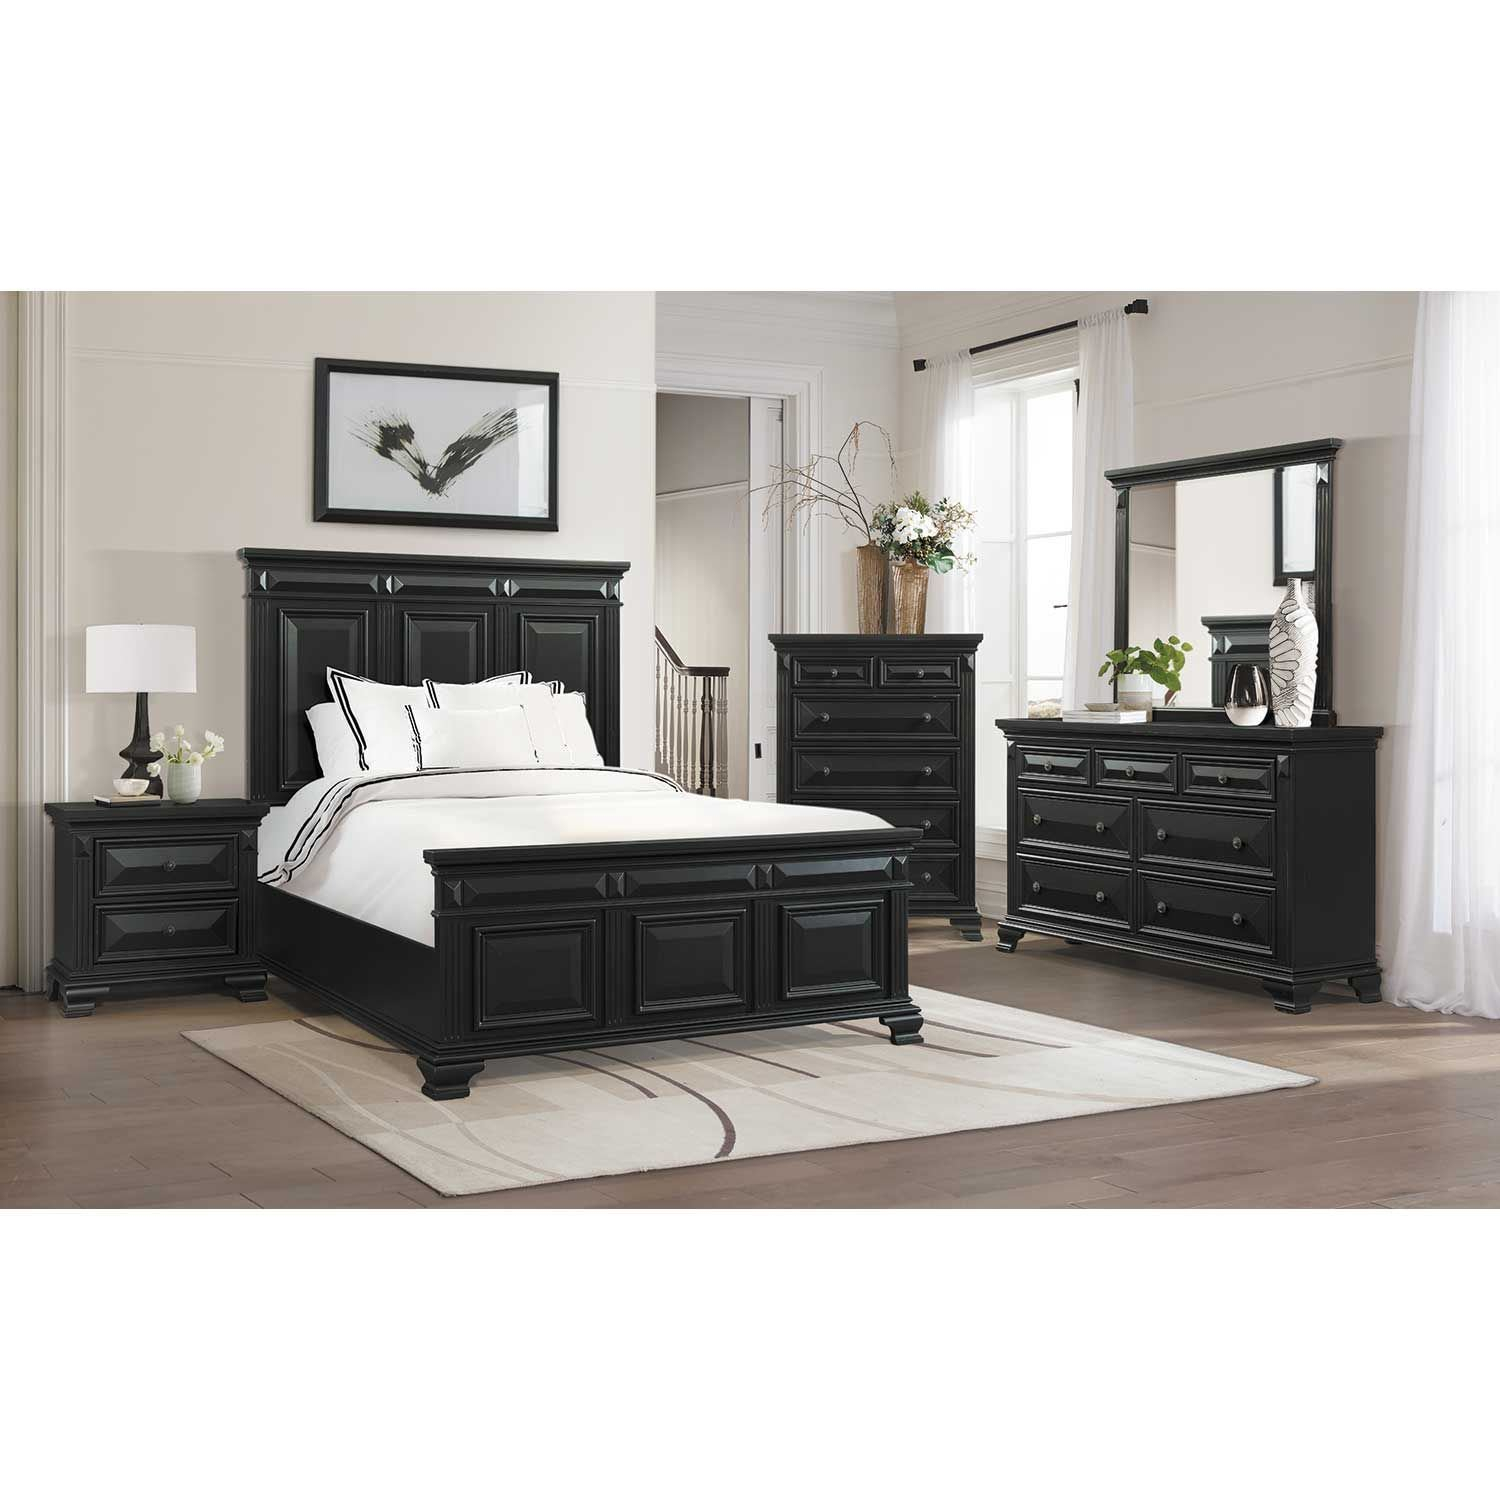 Calloway 5 Piece Bedroom Set throughout size 1500 X 1500